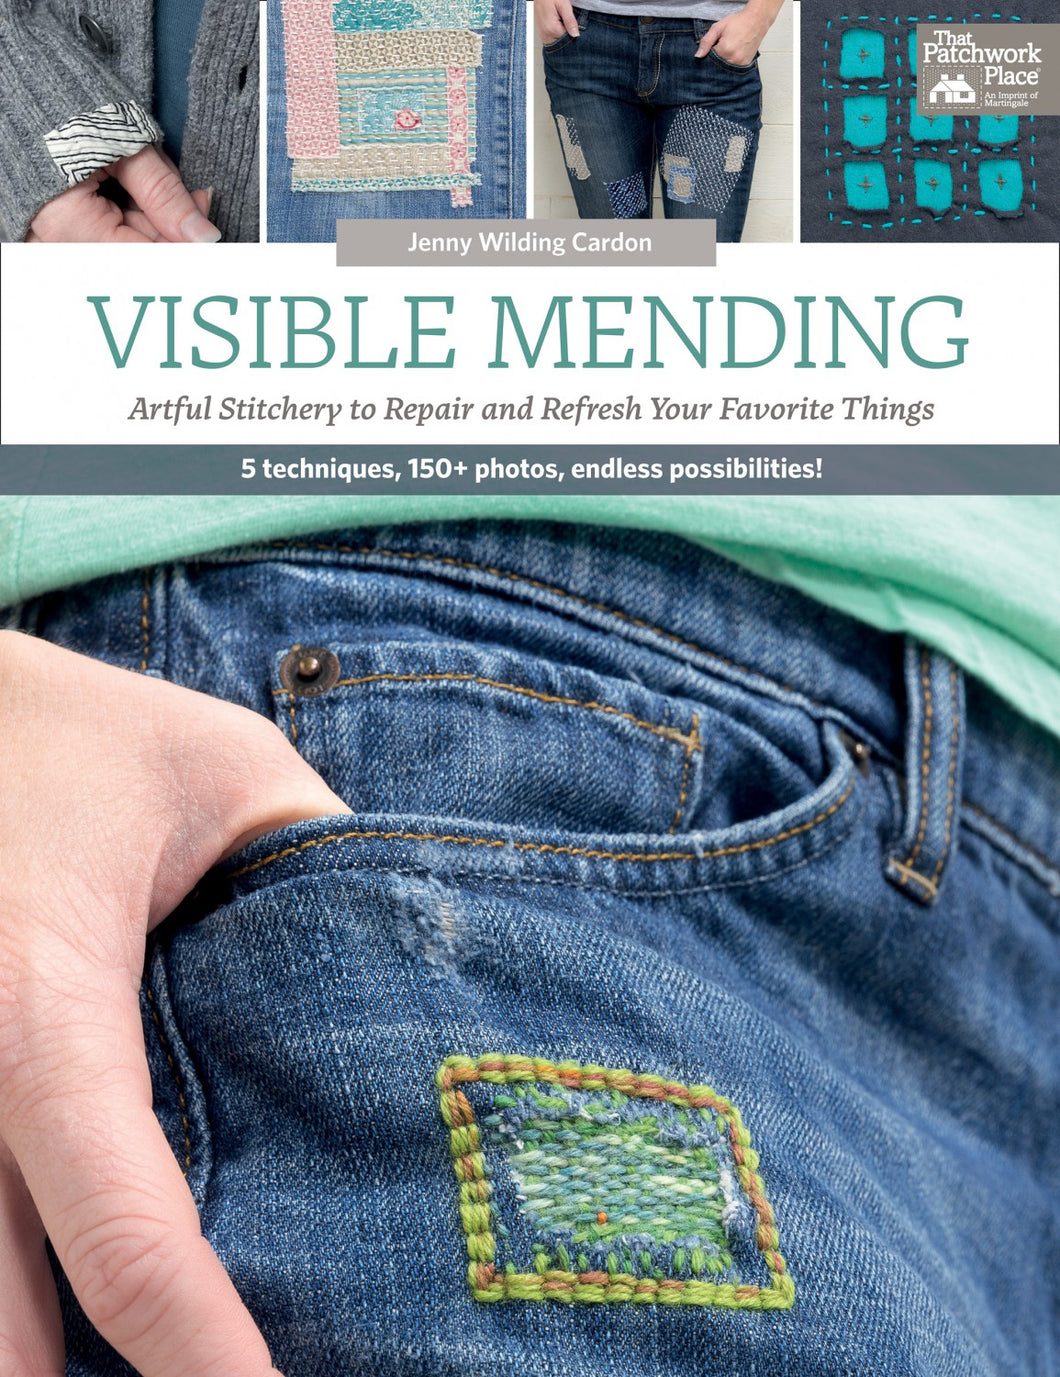 Visible Mending: Artful Stitchery to Repair and Refresh Your Favorite Things by Jenny Wilding Cardon